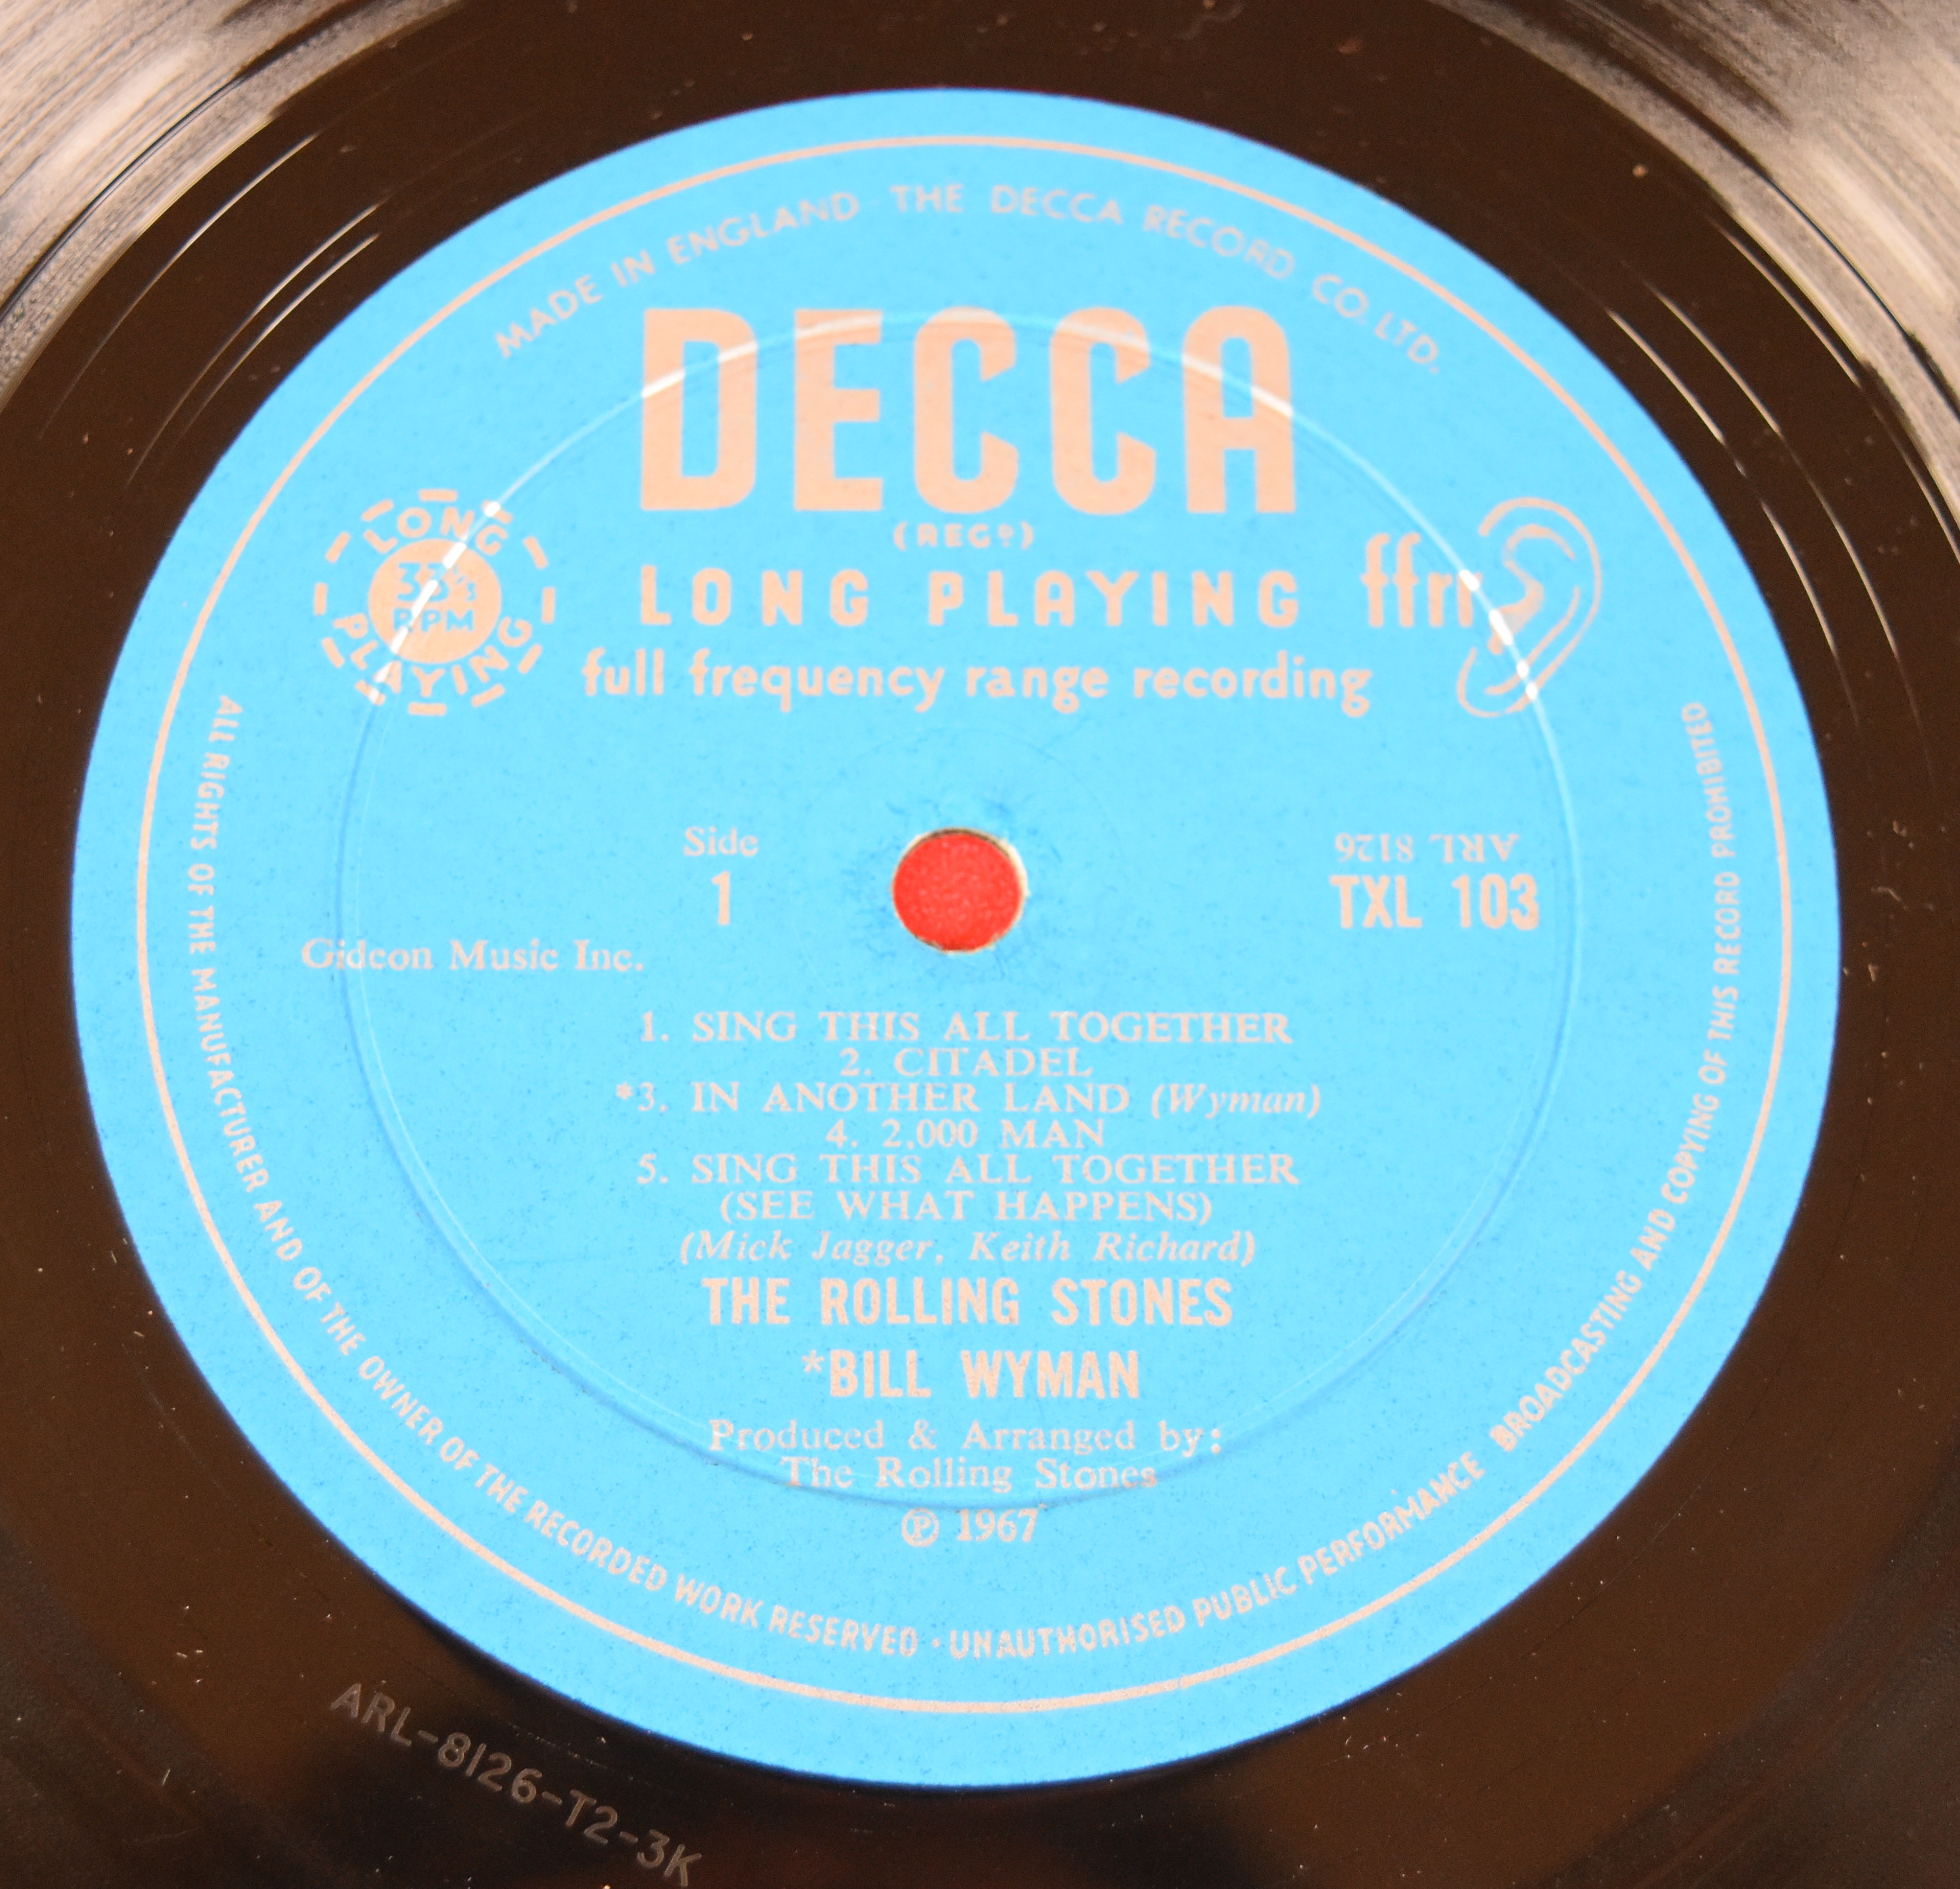 Rolling Stones - Their Satanic Majesties Request (TXL 103), Decca blue label, record appears VG - Image 4 of 4